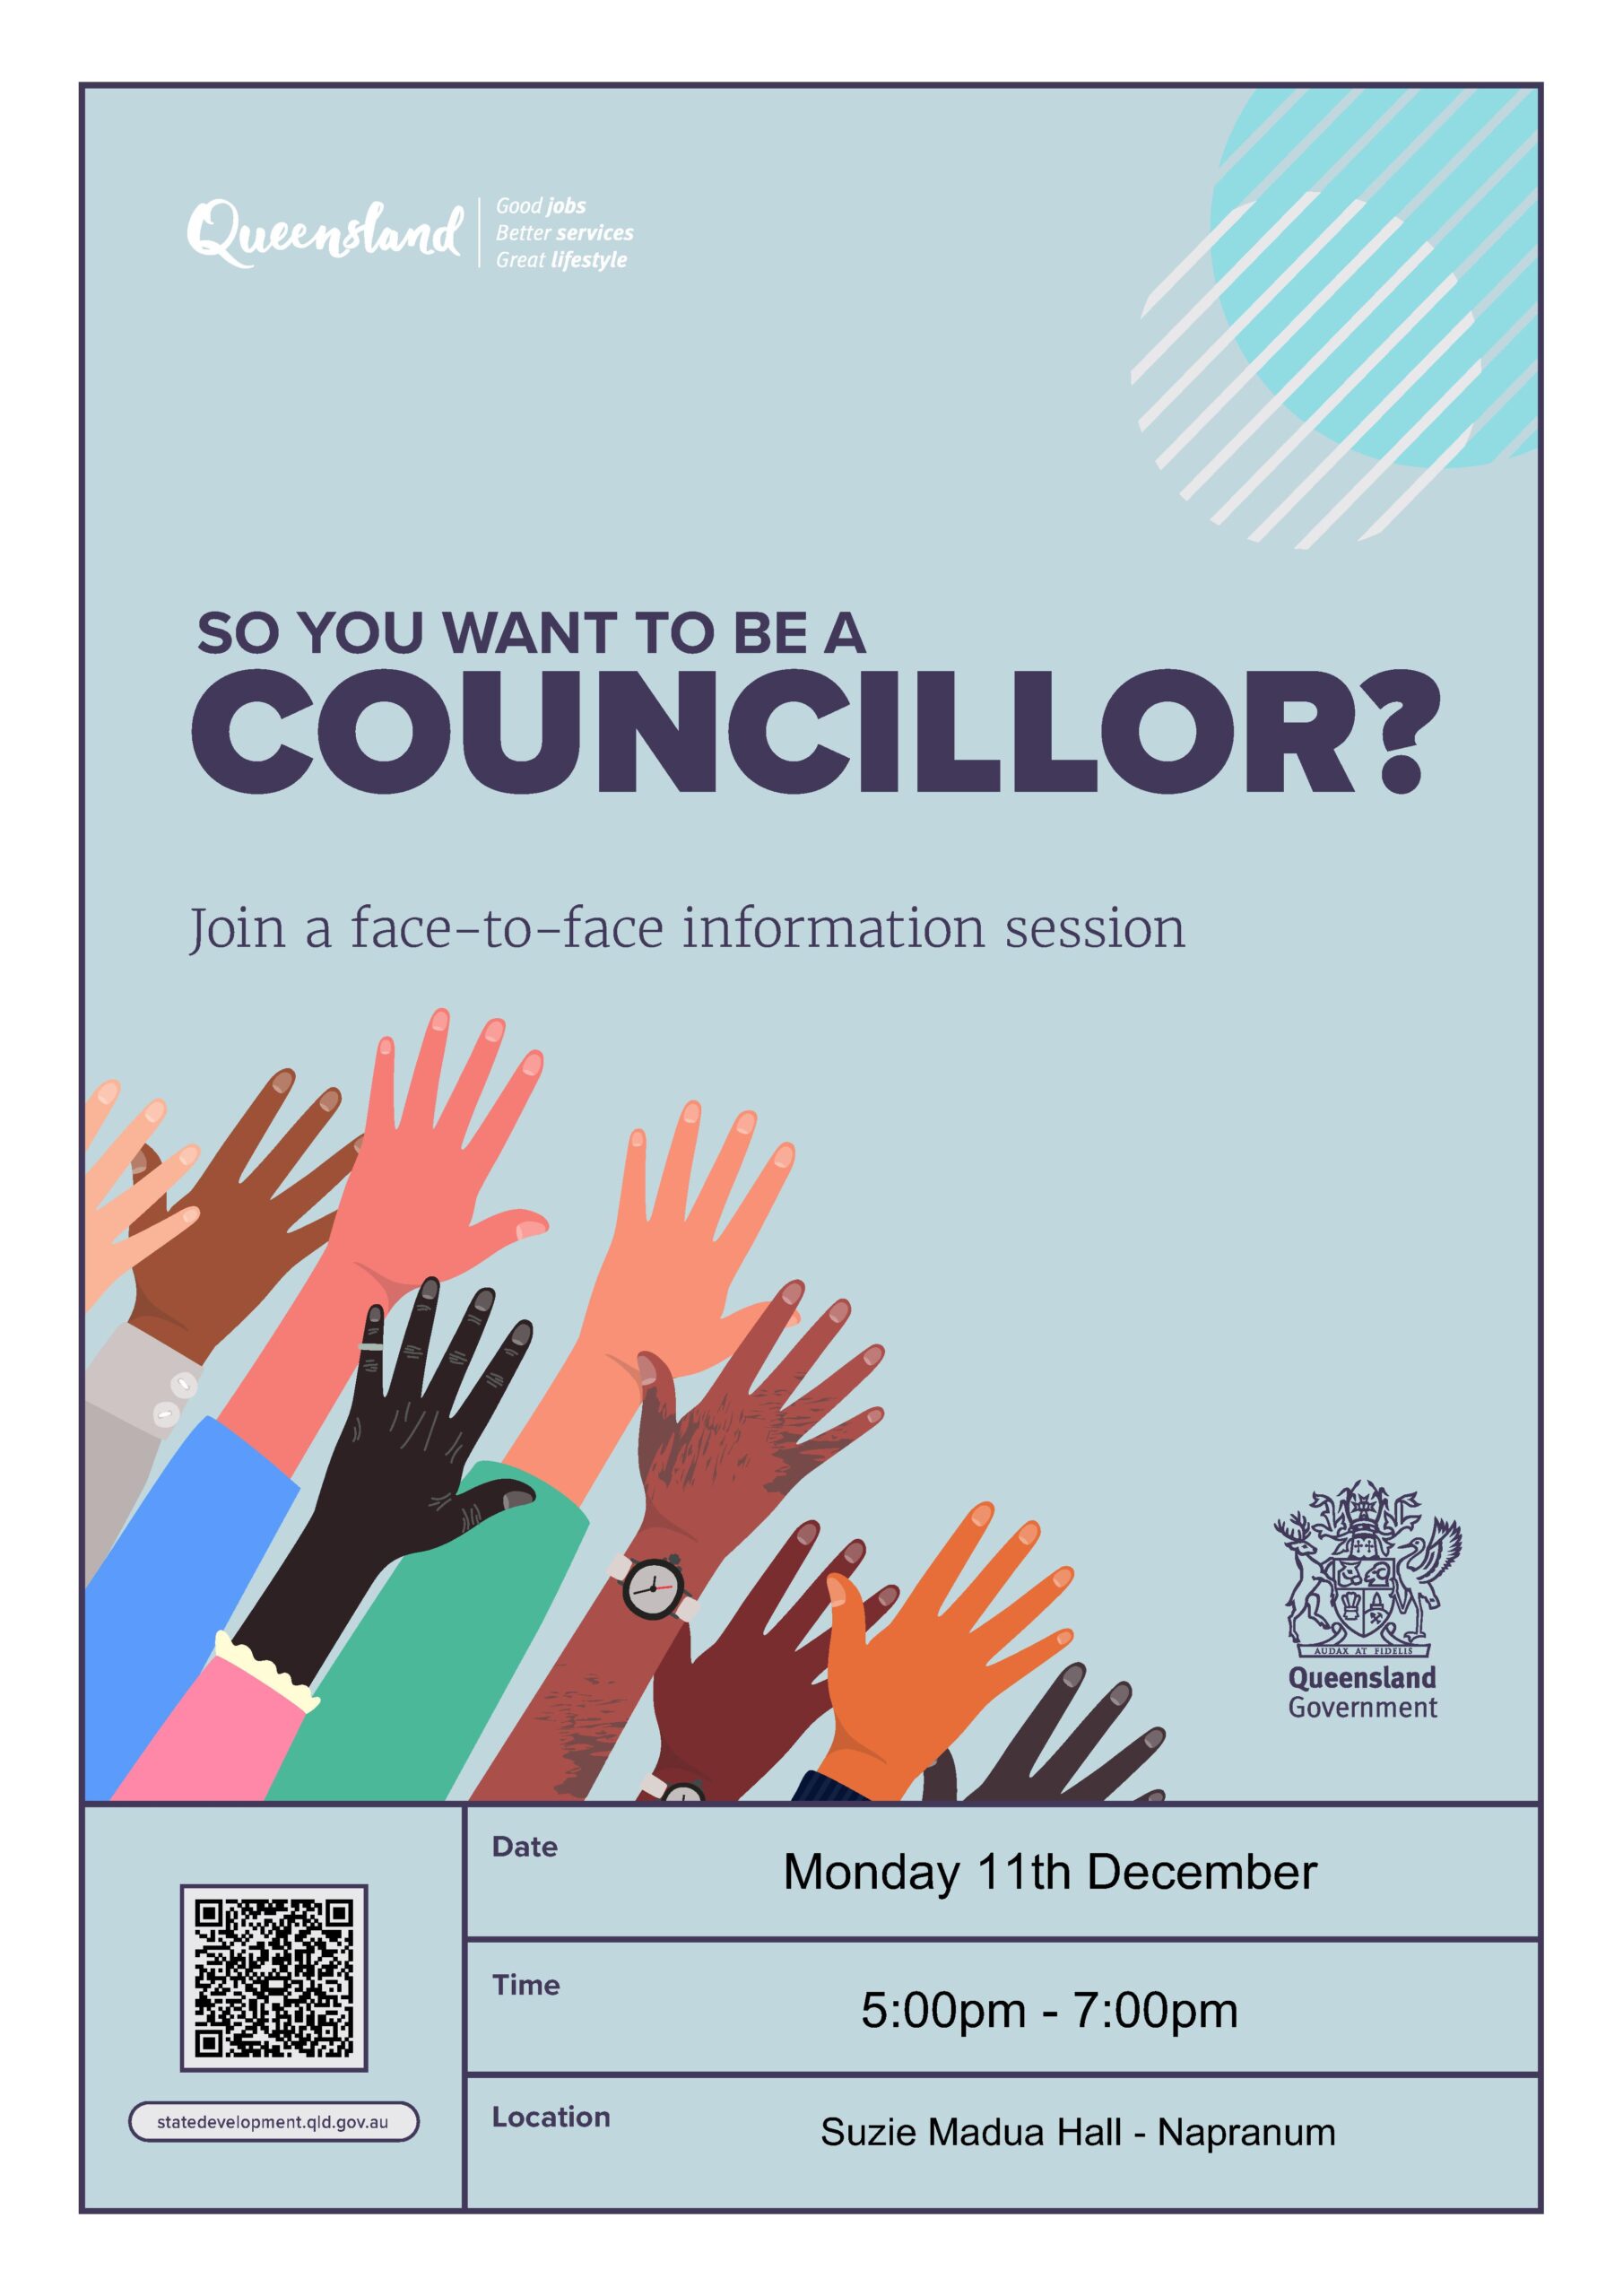 Want to be a Councillor?